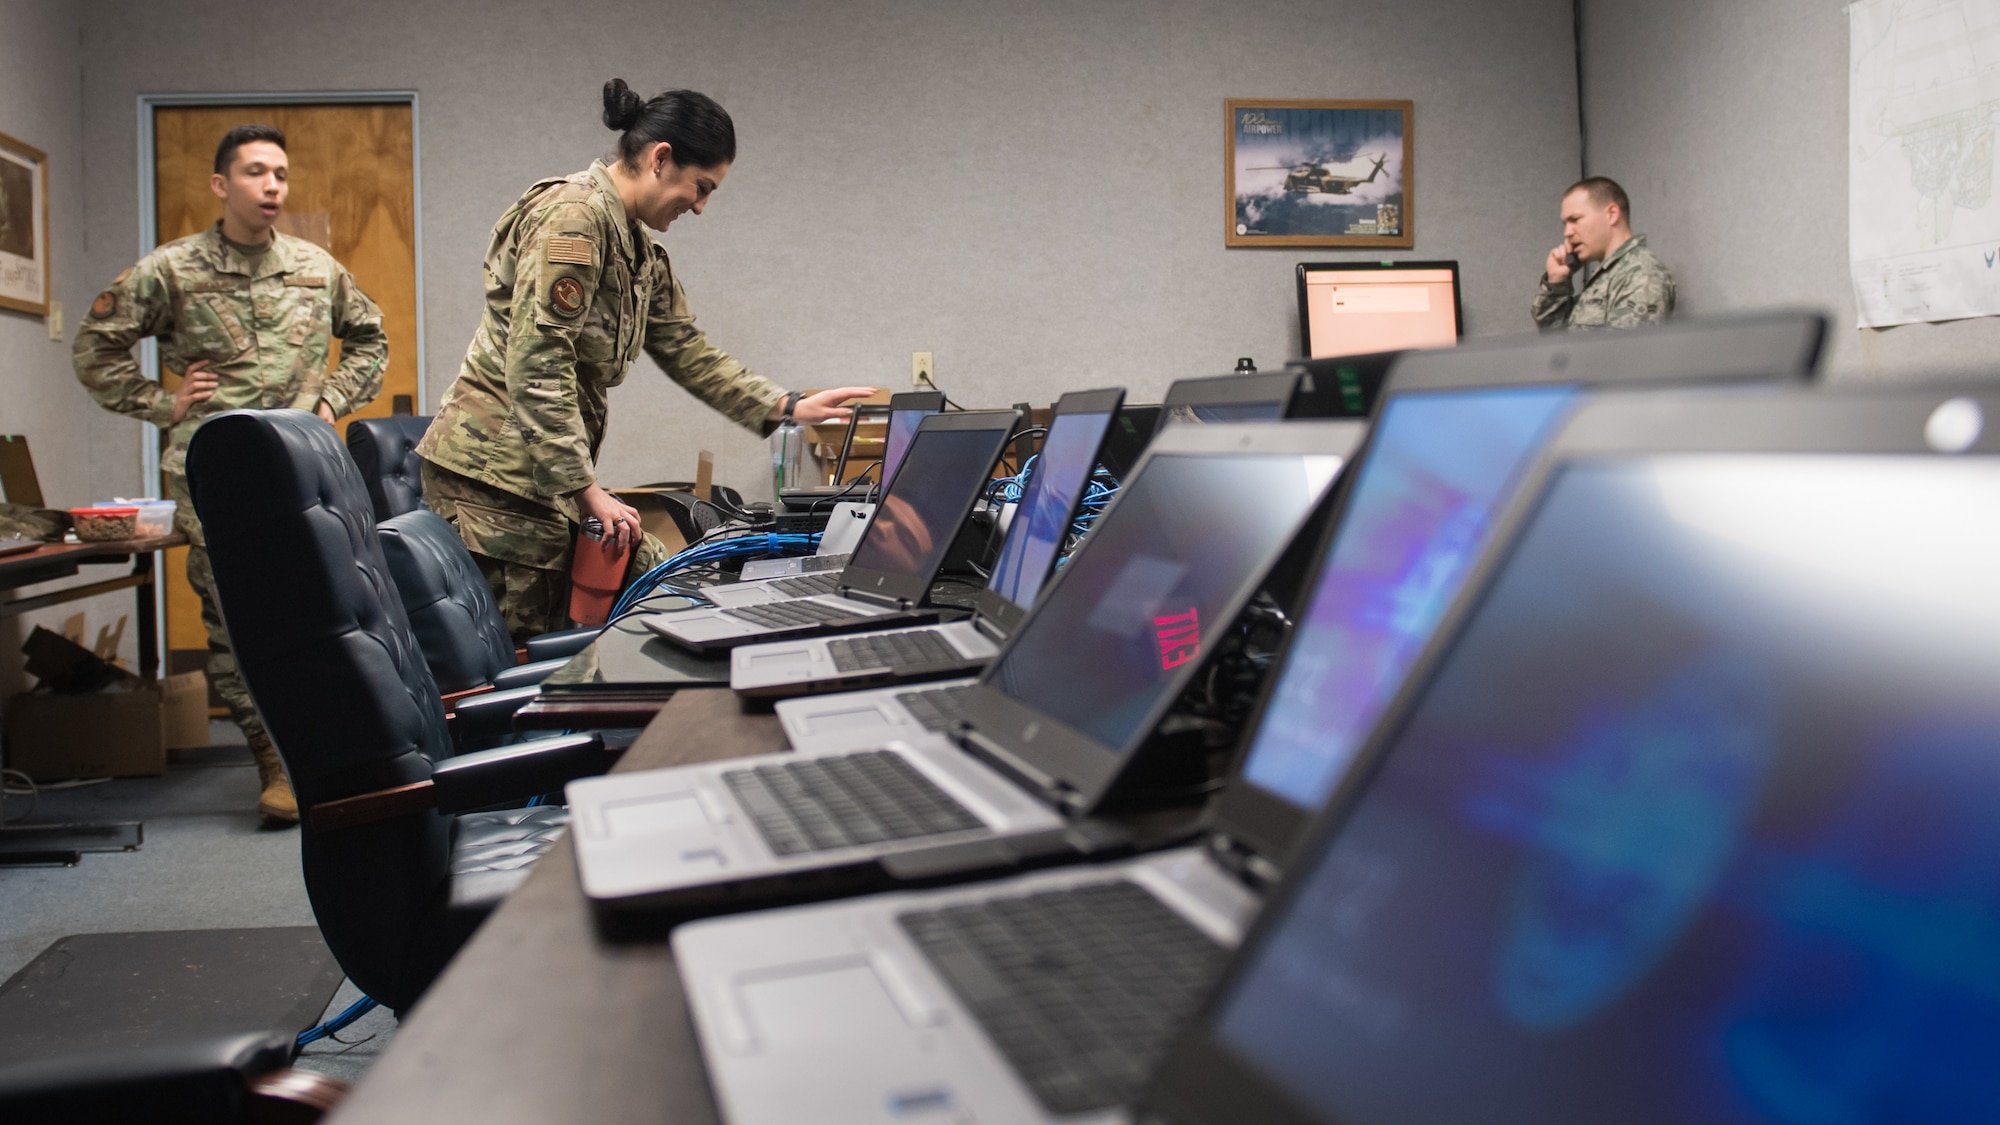 Tech. Sgt. Jessica Oliver, 2nd Communications Squadron base equipment control office NCO-in-charge, looks over an inventory of laptops ready for customer use at  Barksdale Air Force Base, La., March 20, 2020. To meet the surge of teleworking personnel, the 2nd CS expanded operations of "The Hub," a walk-in computer clinic, by repurposing a conference room as a laptop porting station. (U.S. Air Force photo by Tech. Sgt. Daniel Martinez)